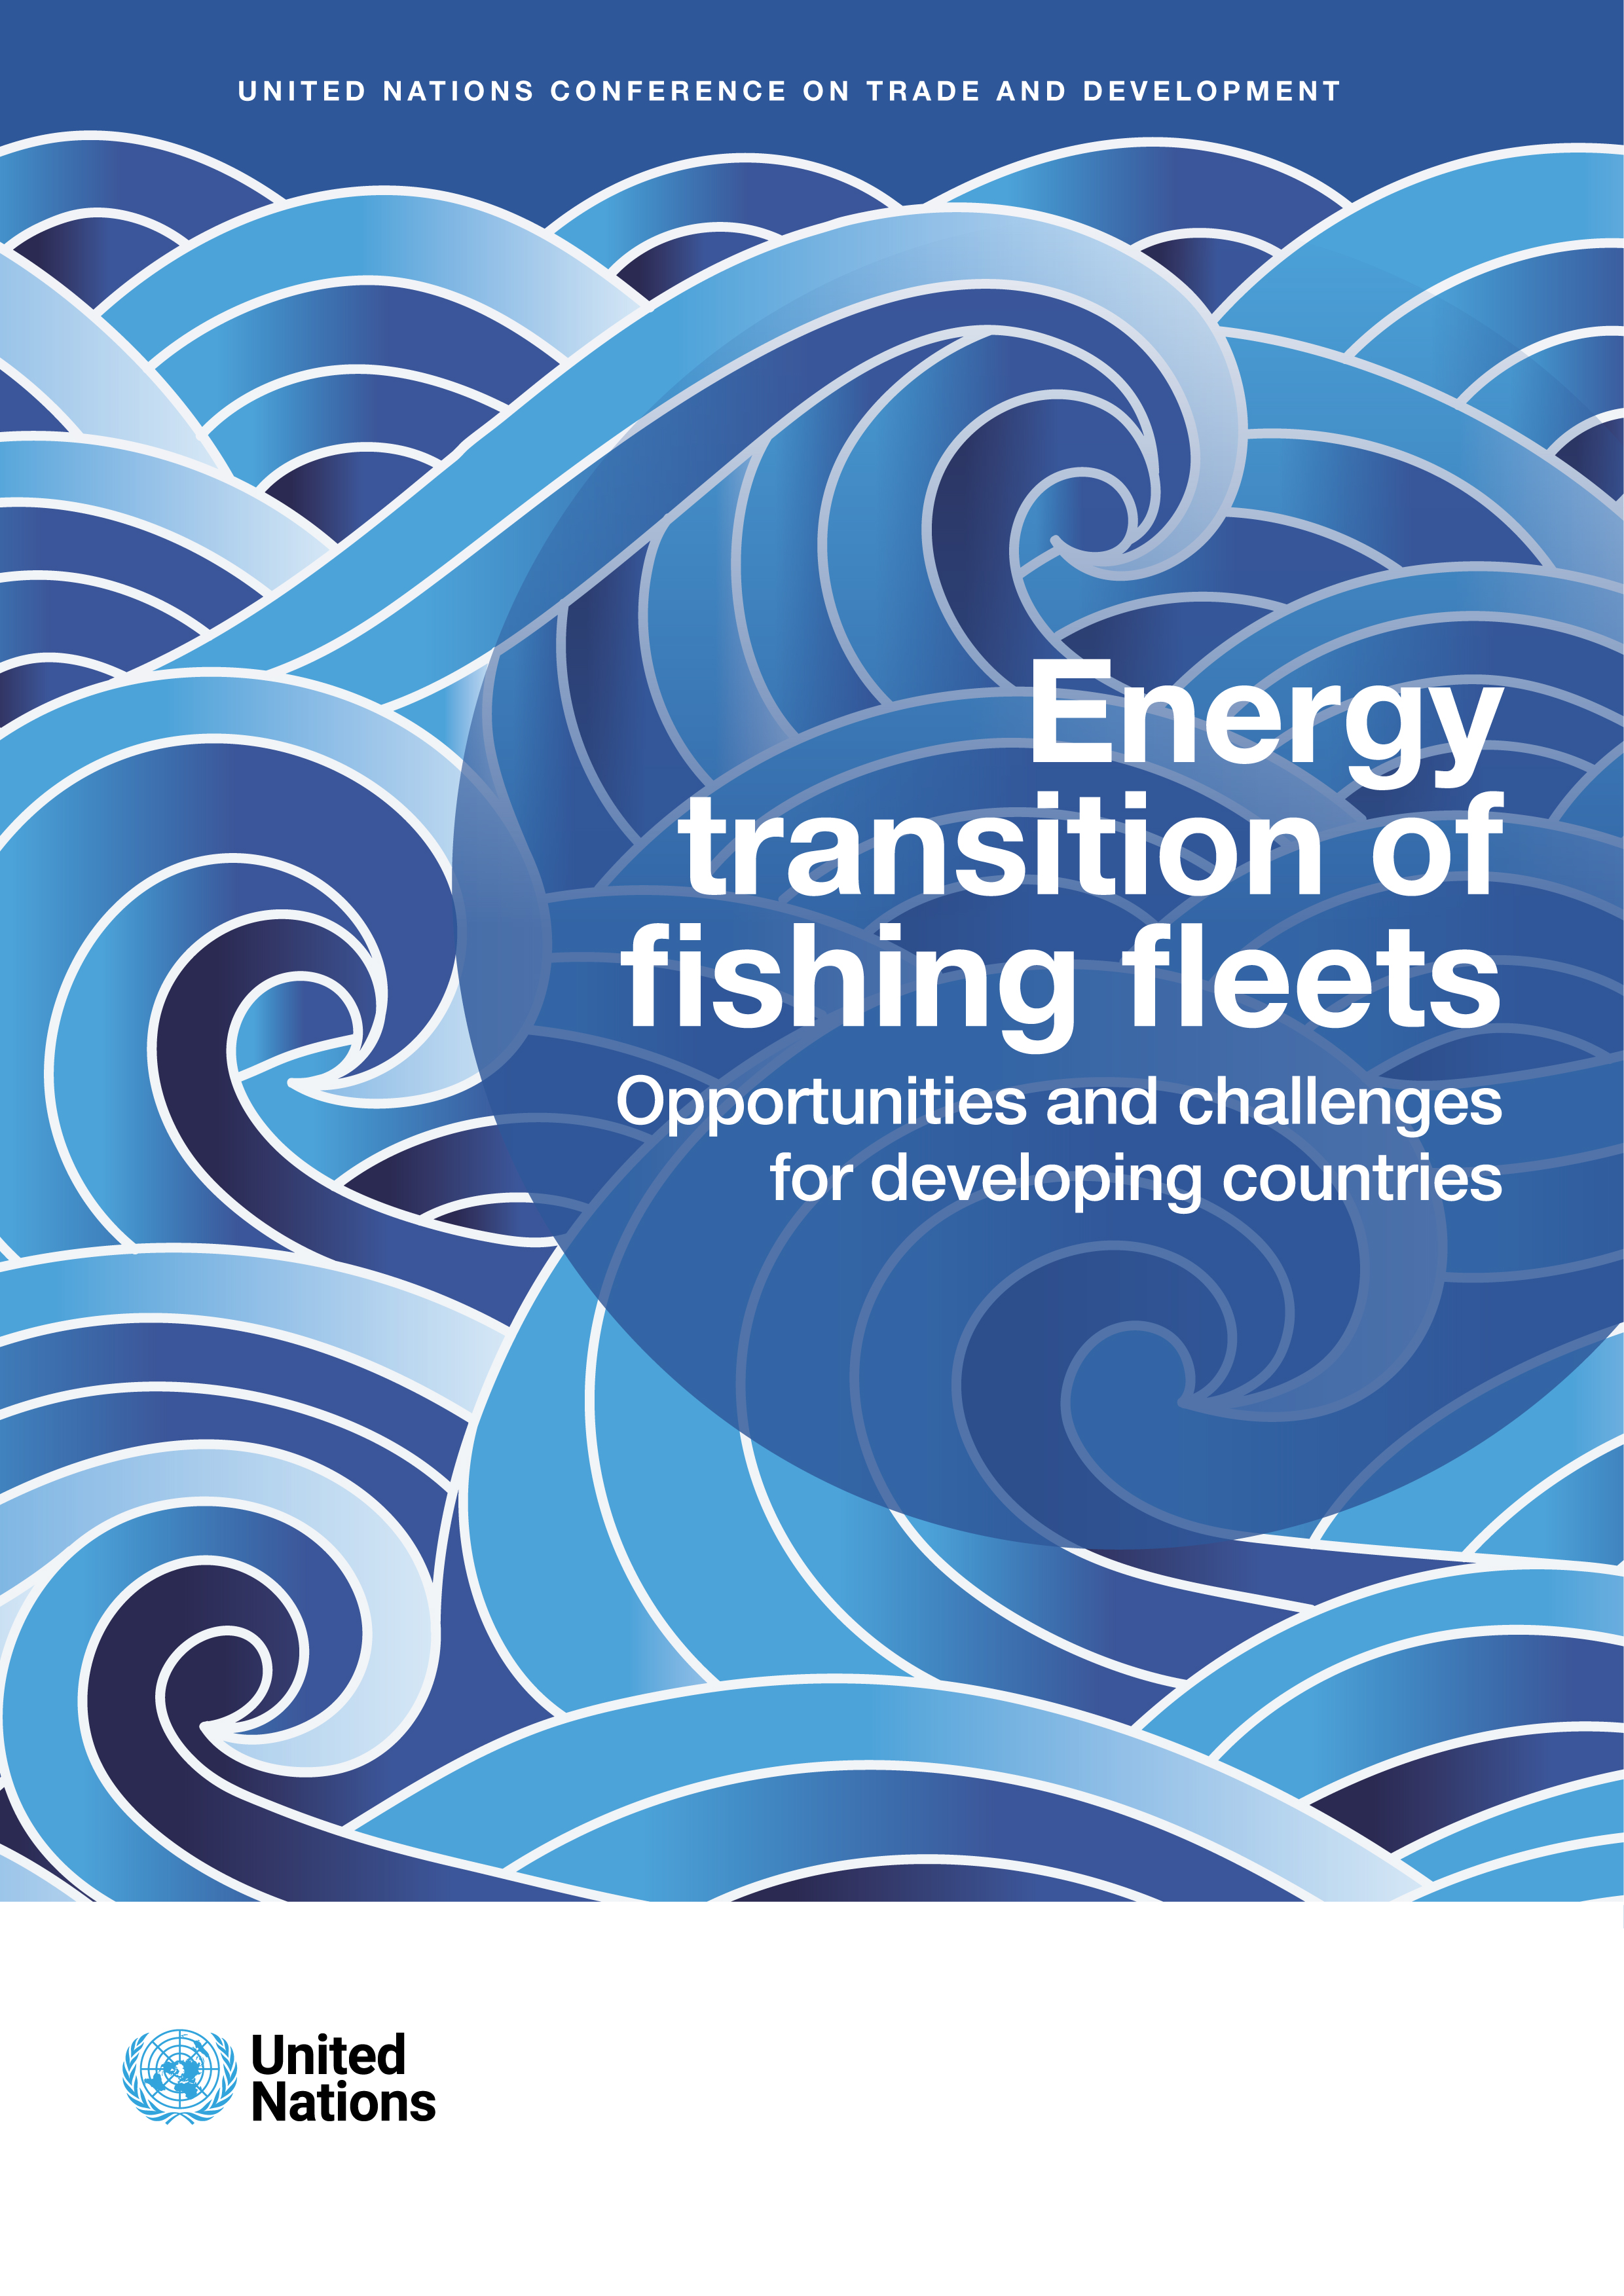 image of Technological opportunities and challenges of alternative energy options for fishing fleets